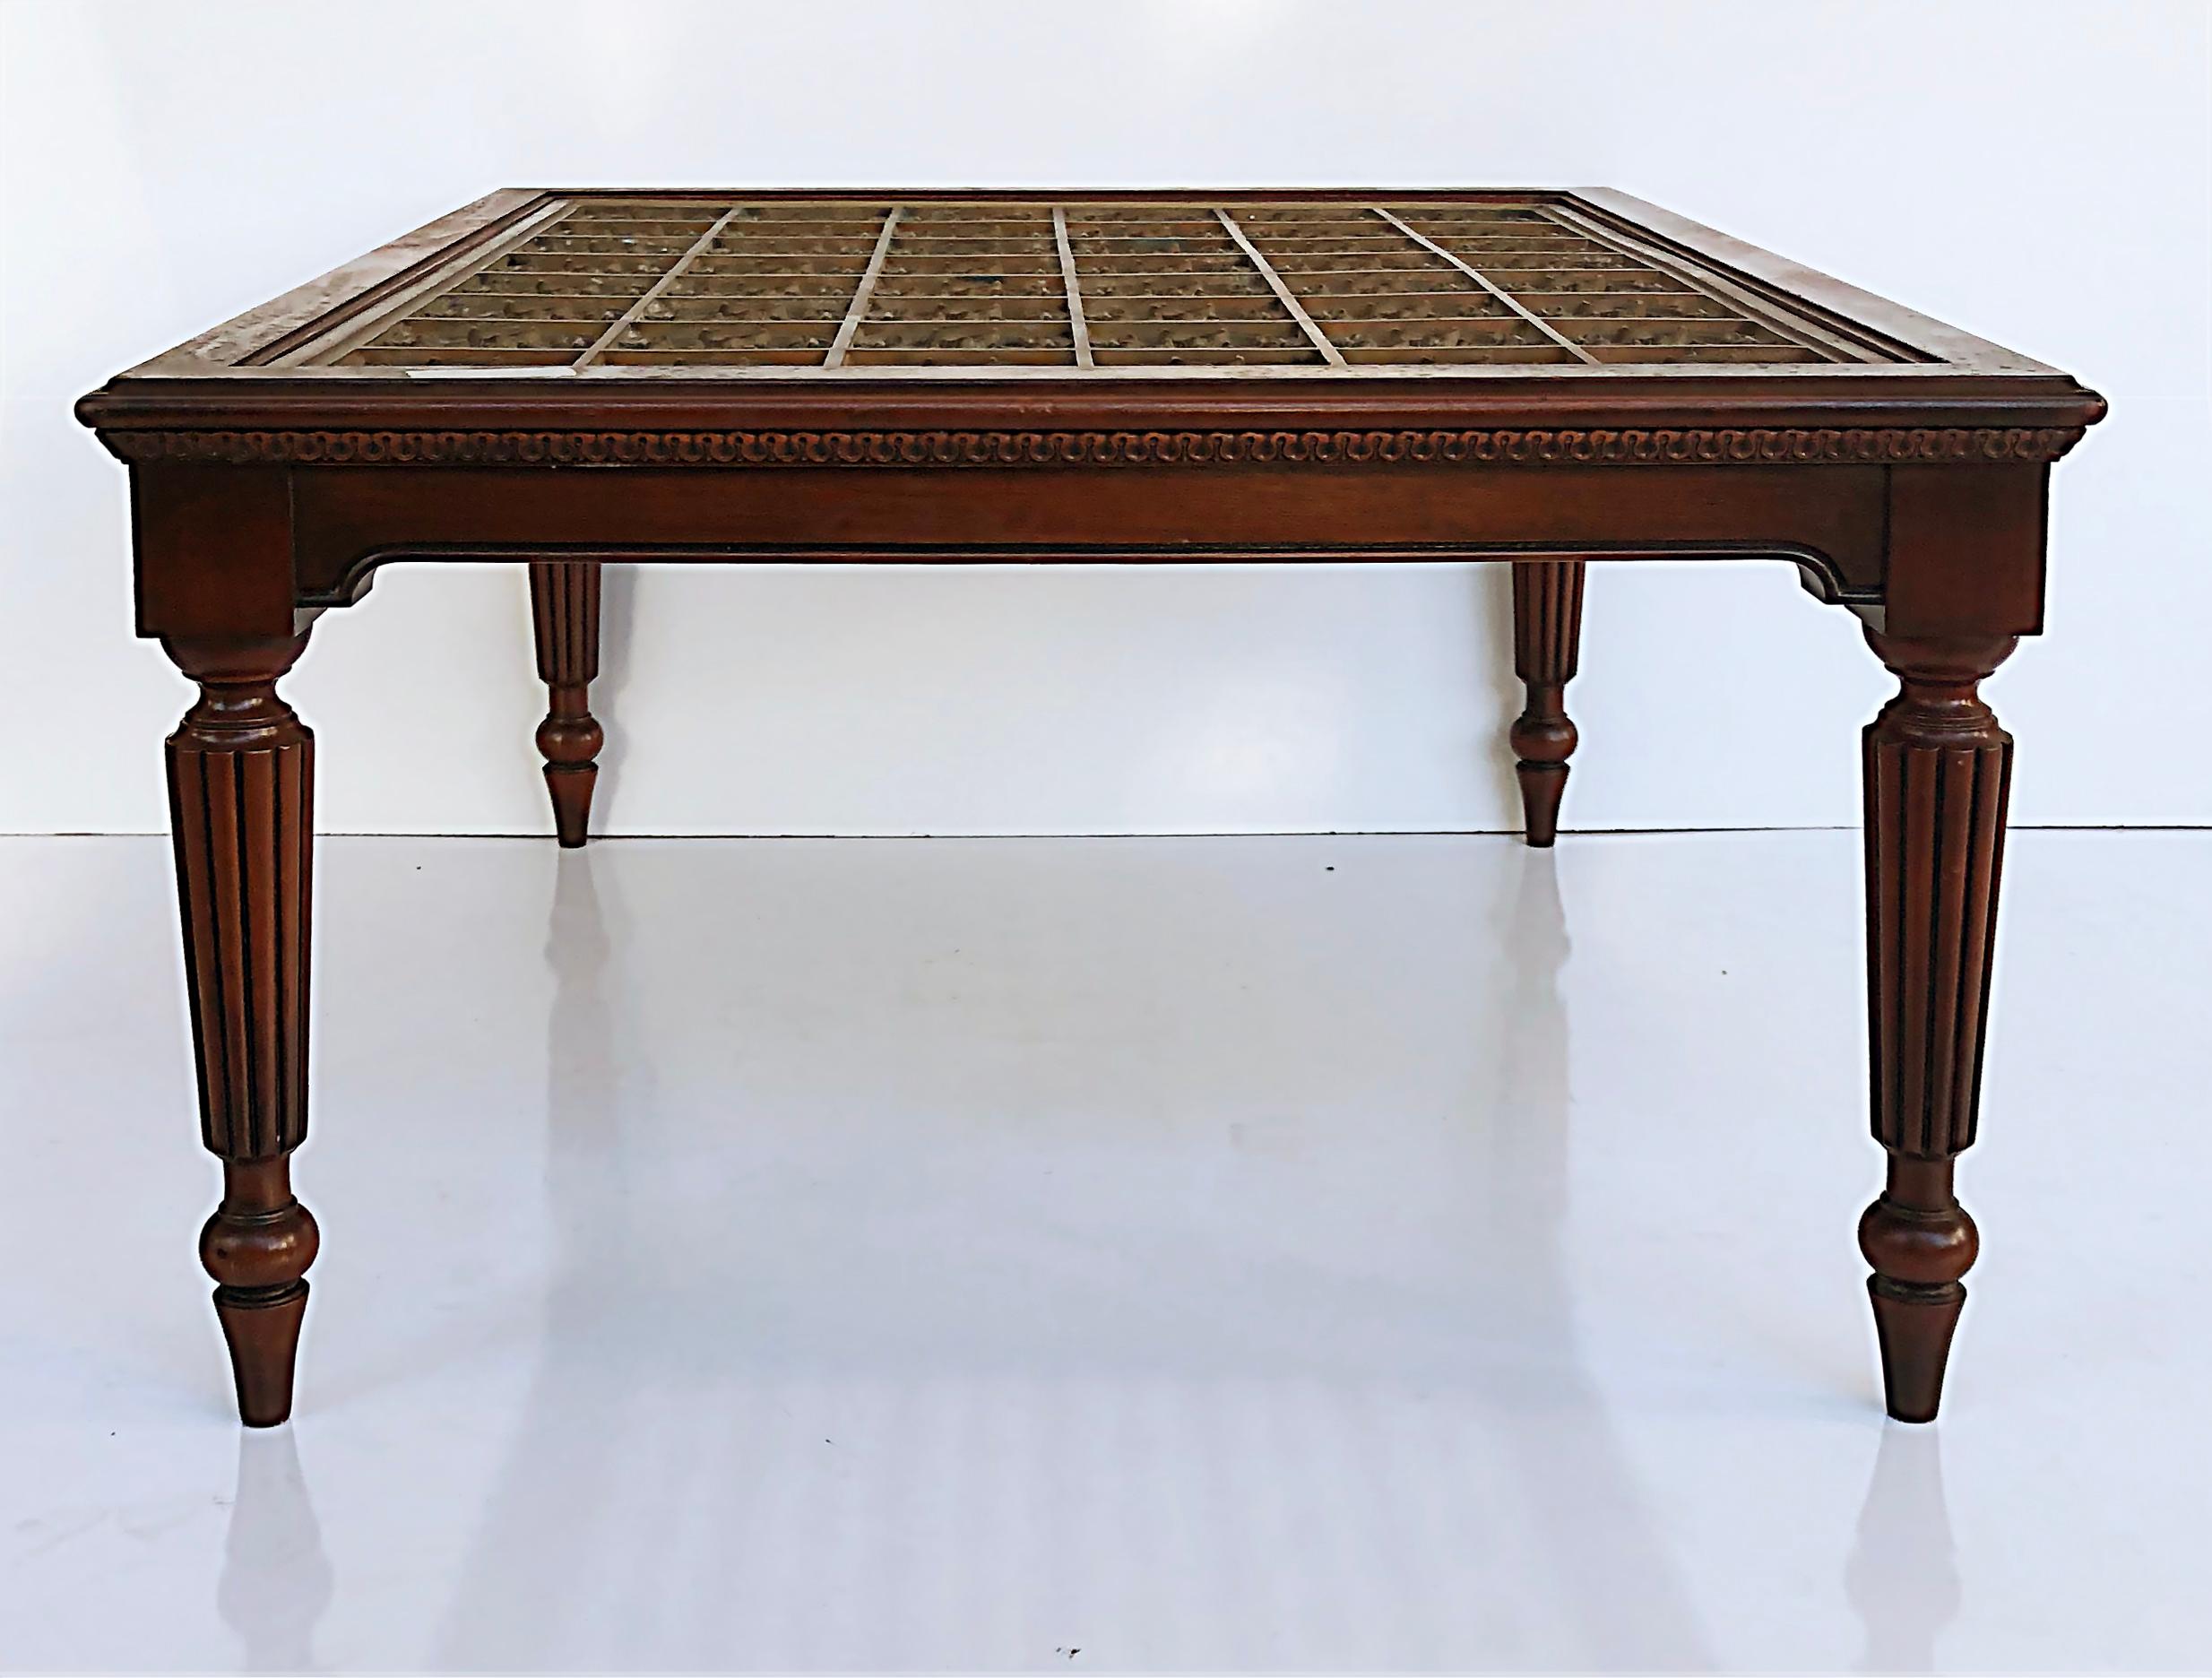 British Colonial Style coffee table with inset bronze. Christie's auction label.

Offered for sale is a British Colonial-style coffee table with an inset bronze grate. The tabletop is supported by four turned tapering legs with fluting. This table